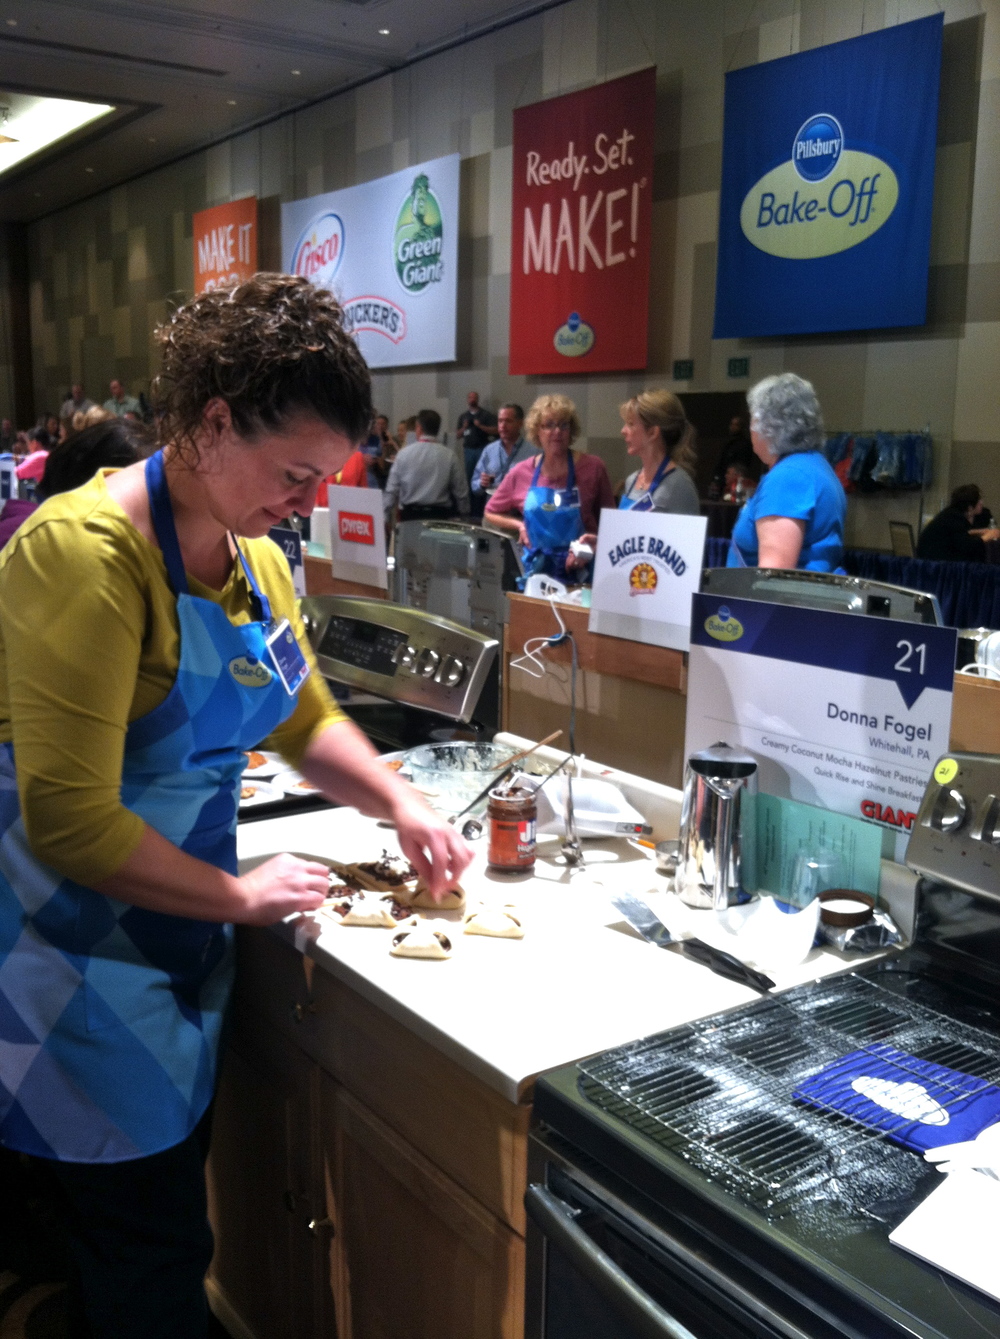  Here is Donna Fogel of Whitehall, PA working on her Creamy Coconut Mocha Hazlenut Pastries!  Looks great Donna! 